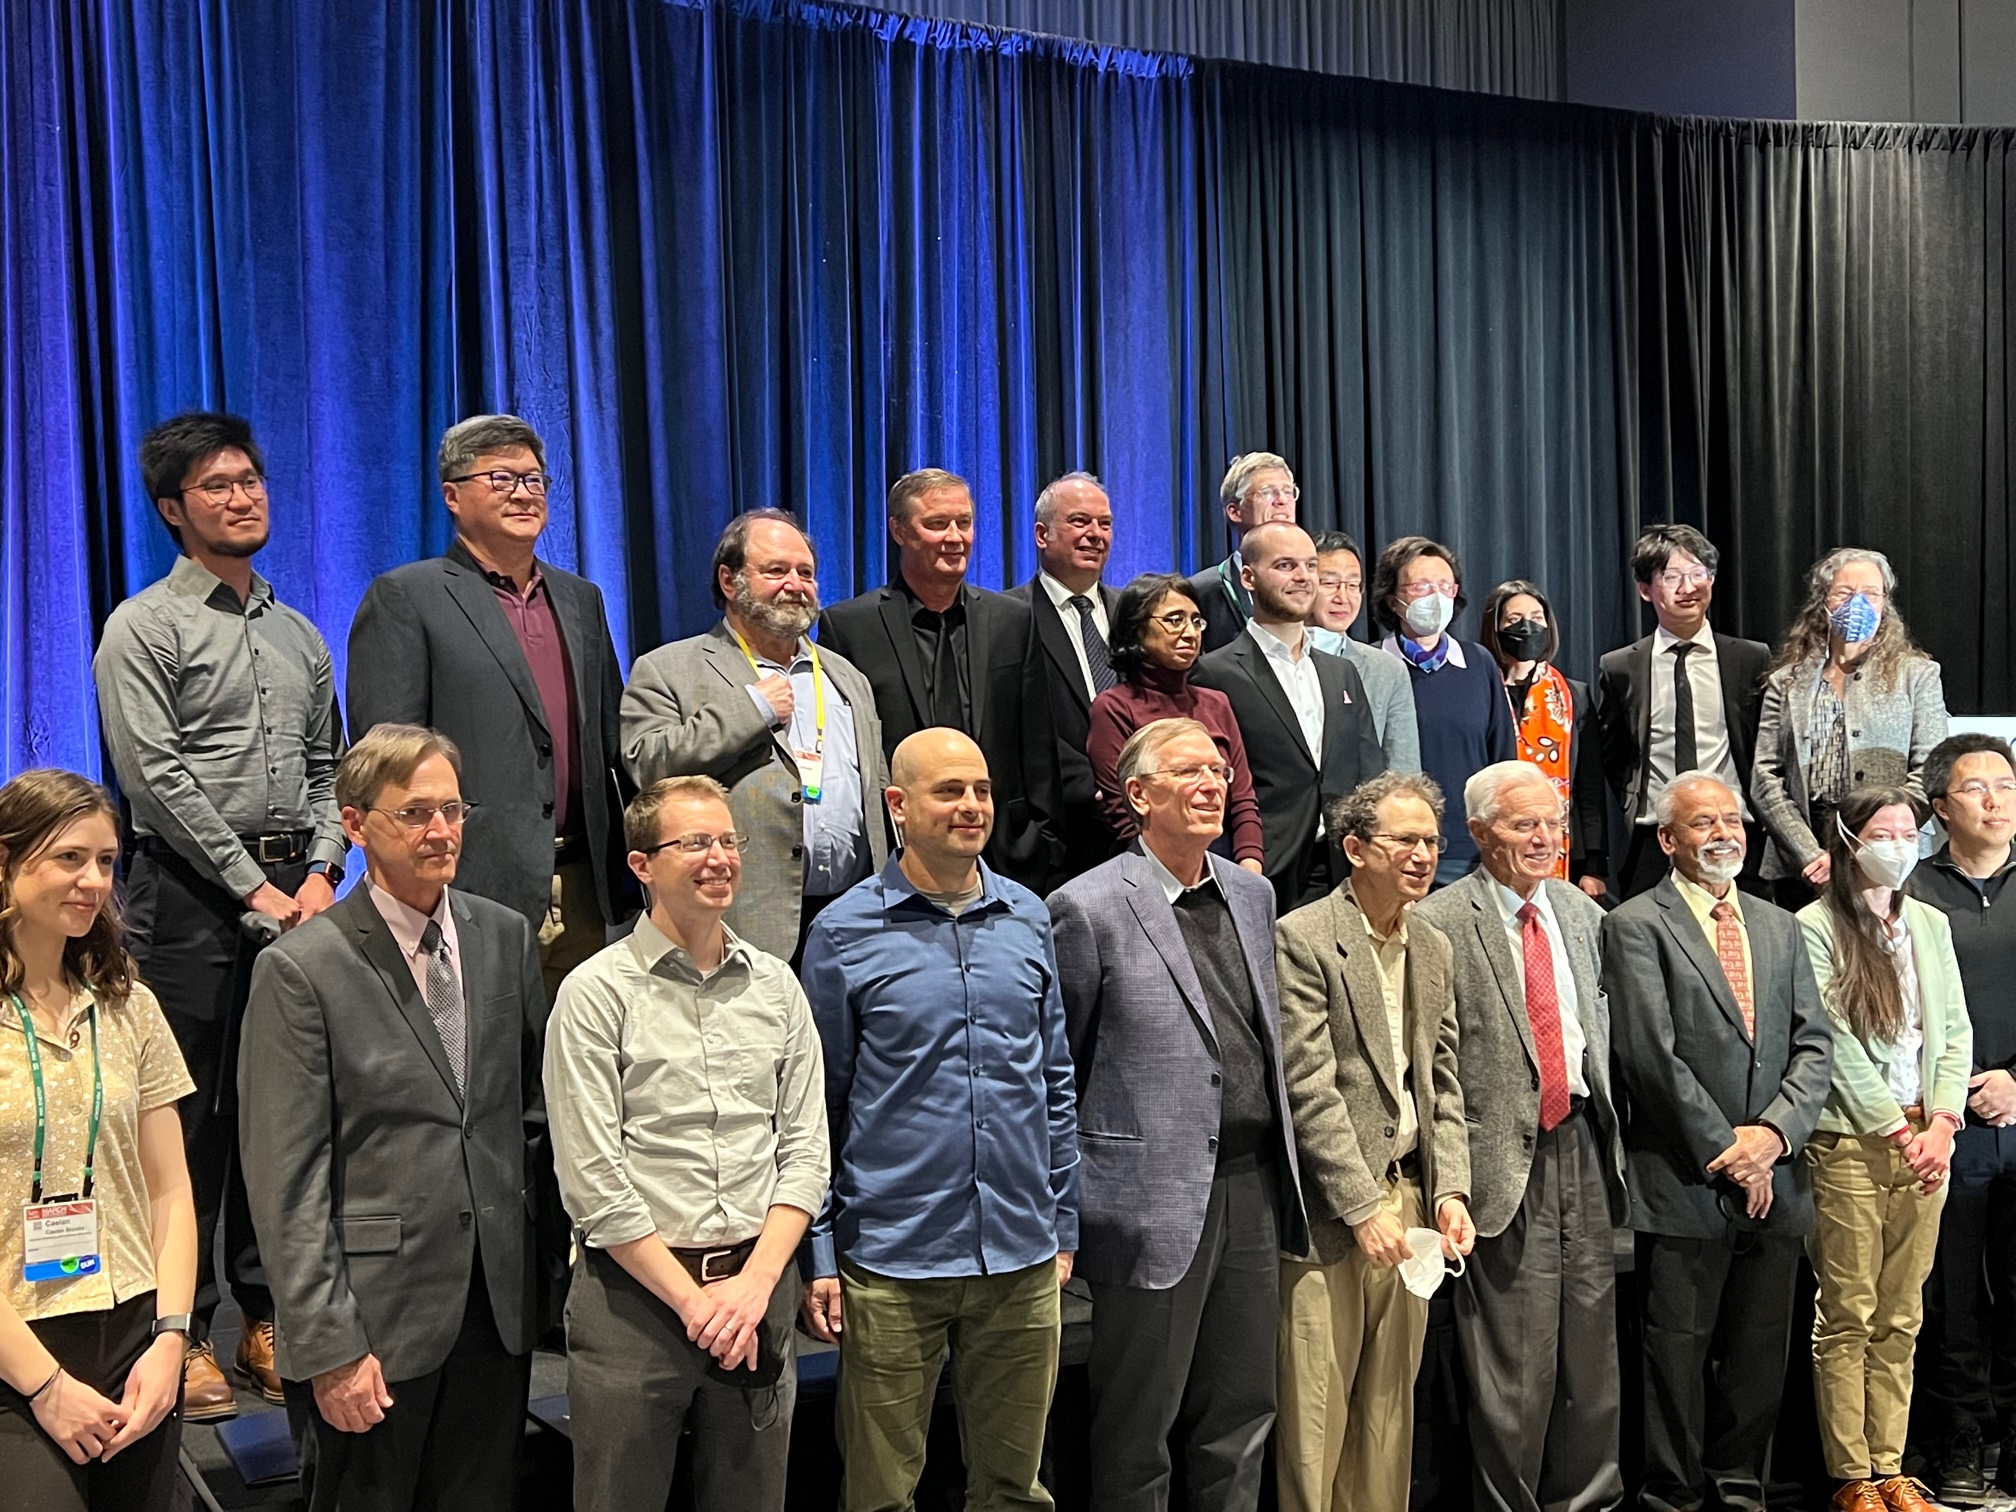 2022 APS Prize and Award Session participants